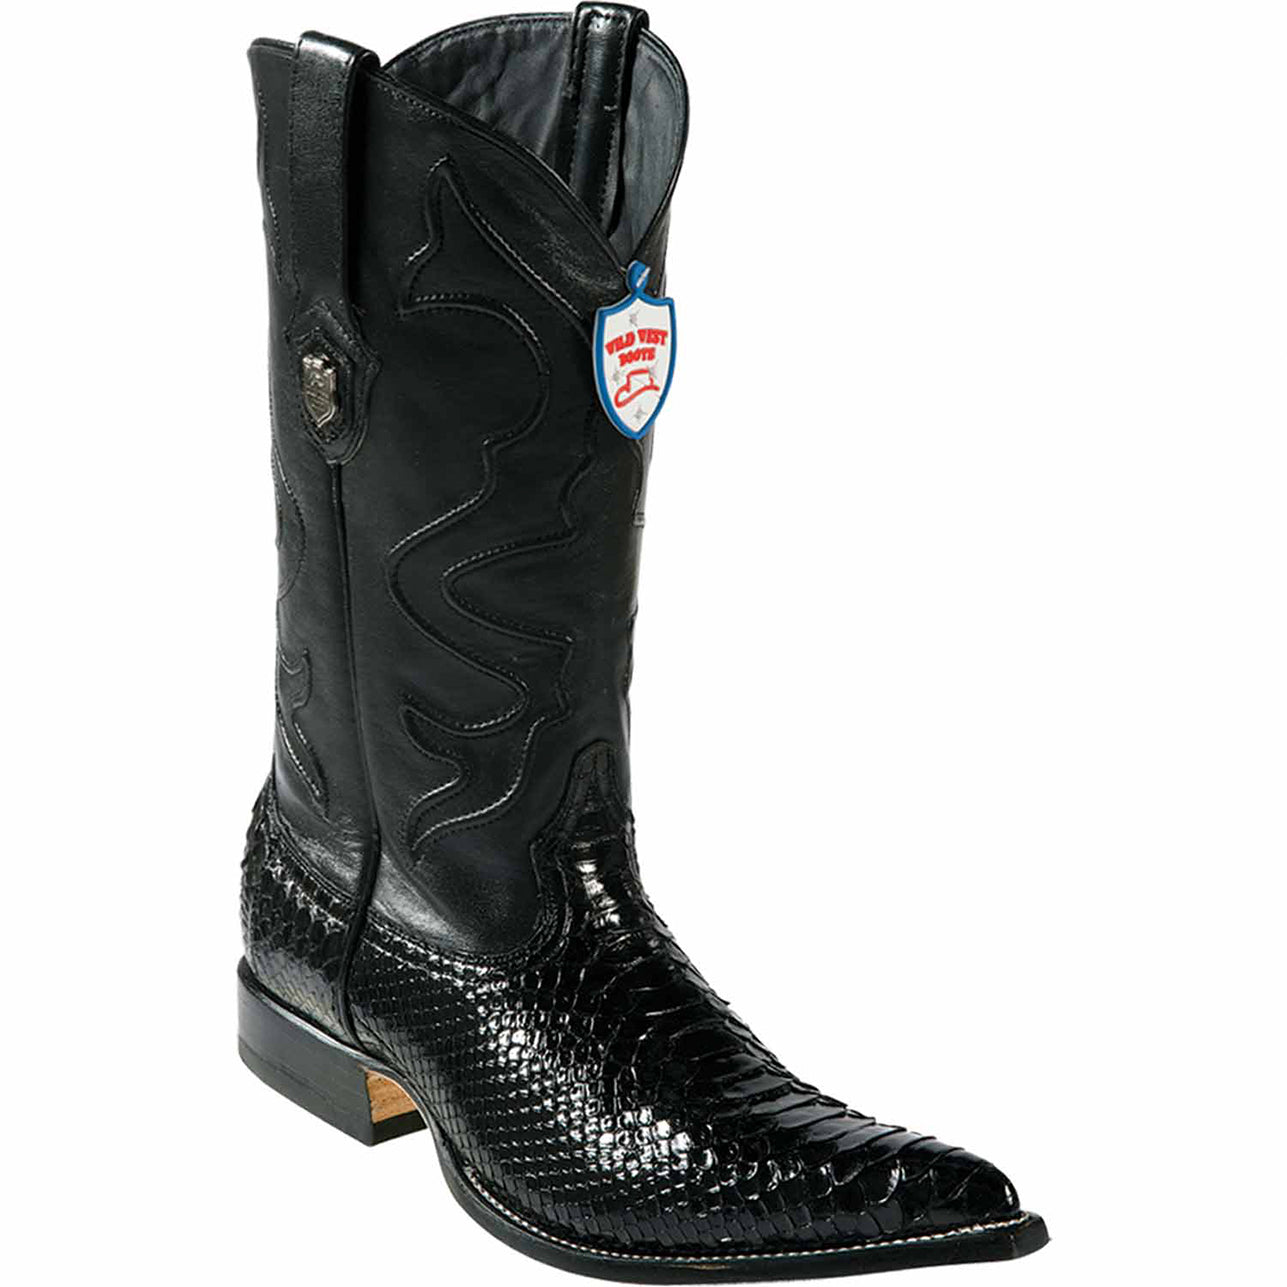 Pointy Snake Skin Boots